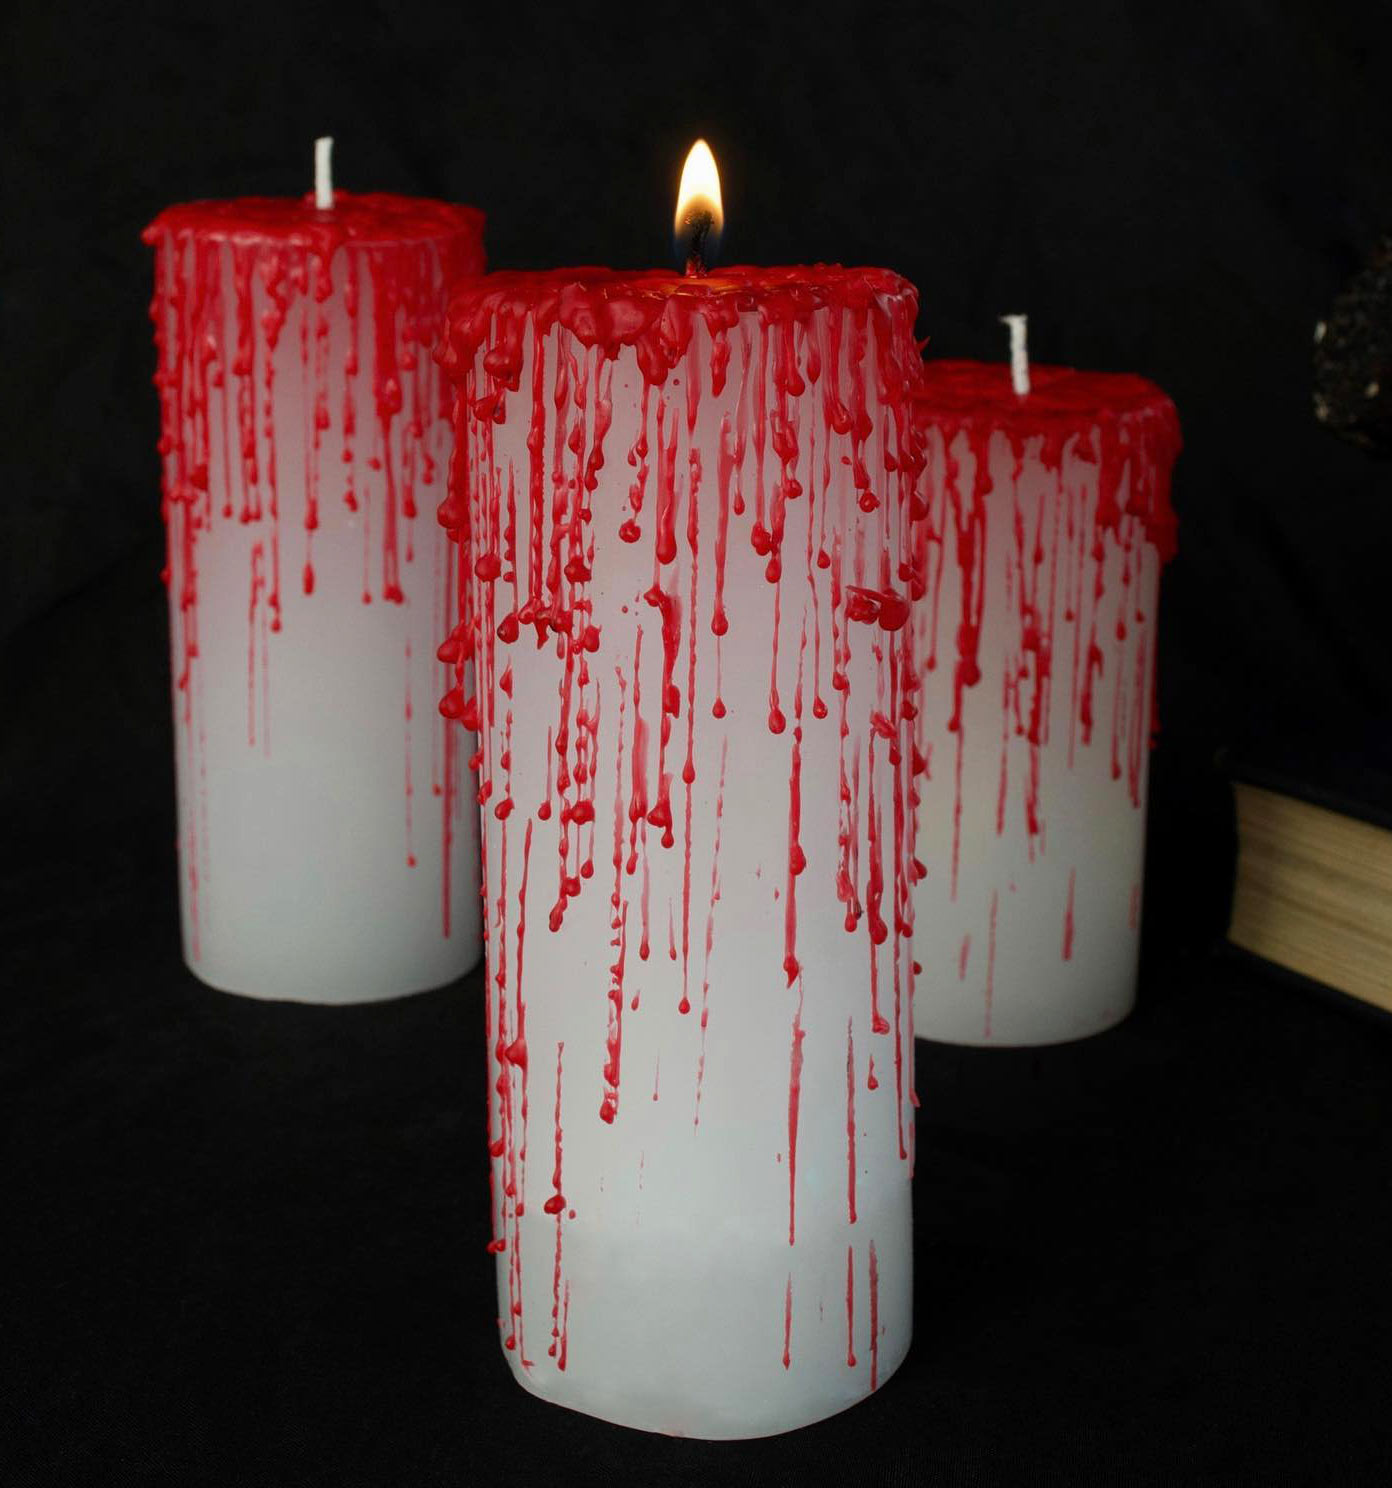 Three bloody candles